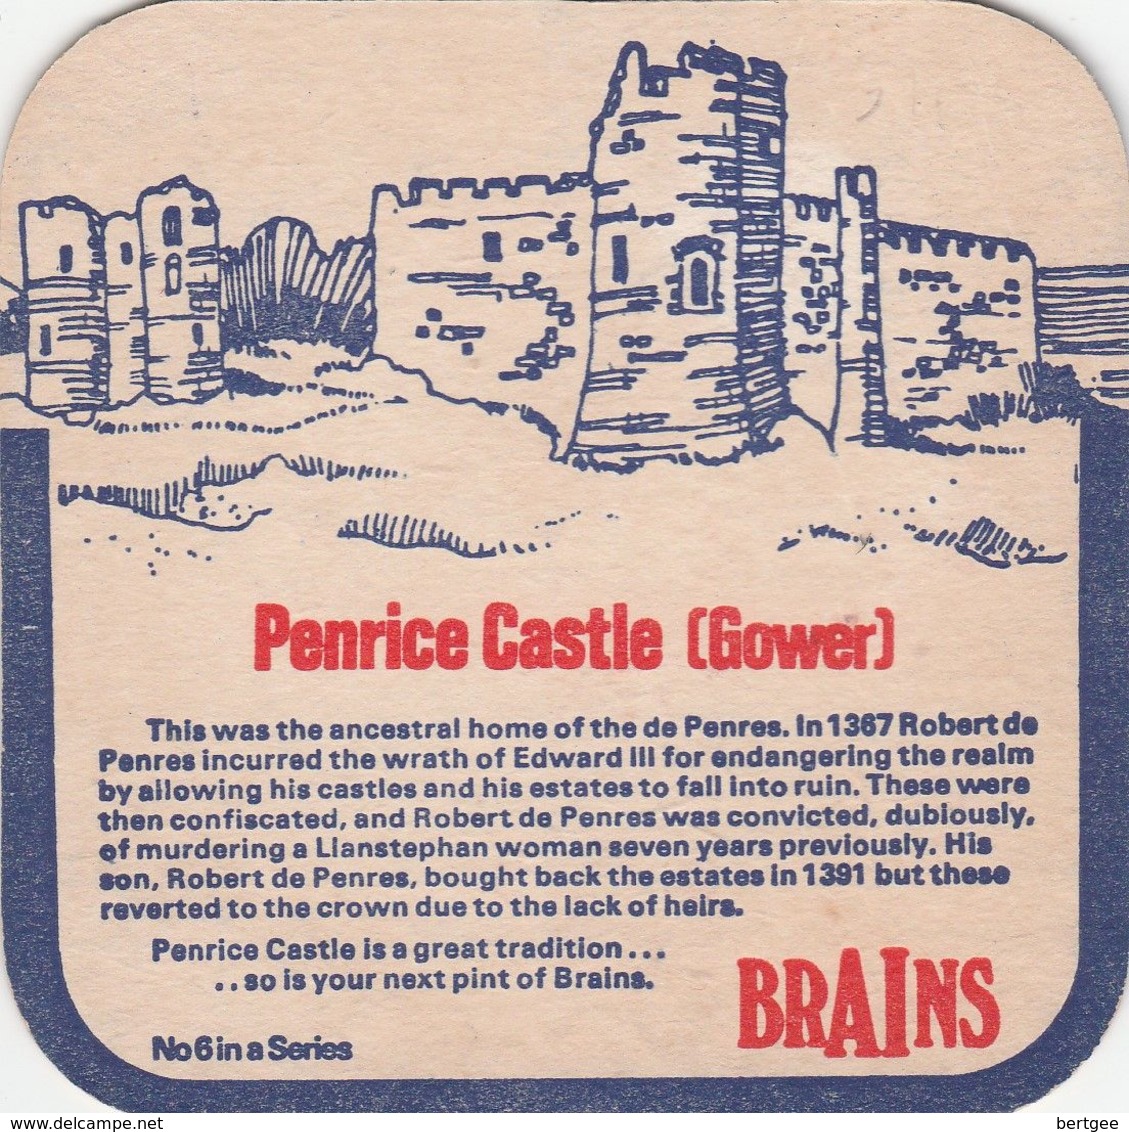 BEERMAT - BRAINS BREWERY  (CARDIFF, WALES) - PENRICE CASTLE GOWER - (Cat No 039) - (1975) - Portavasos